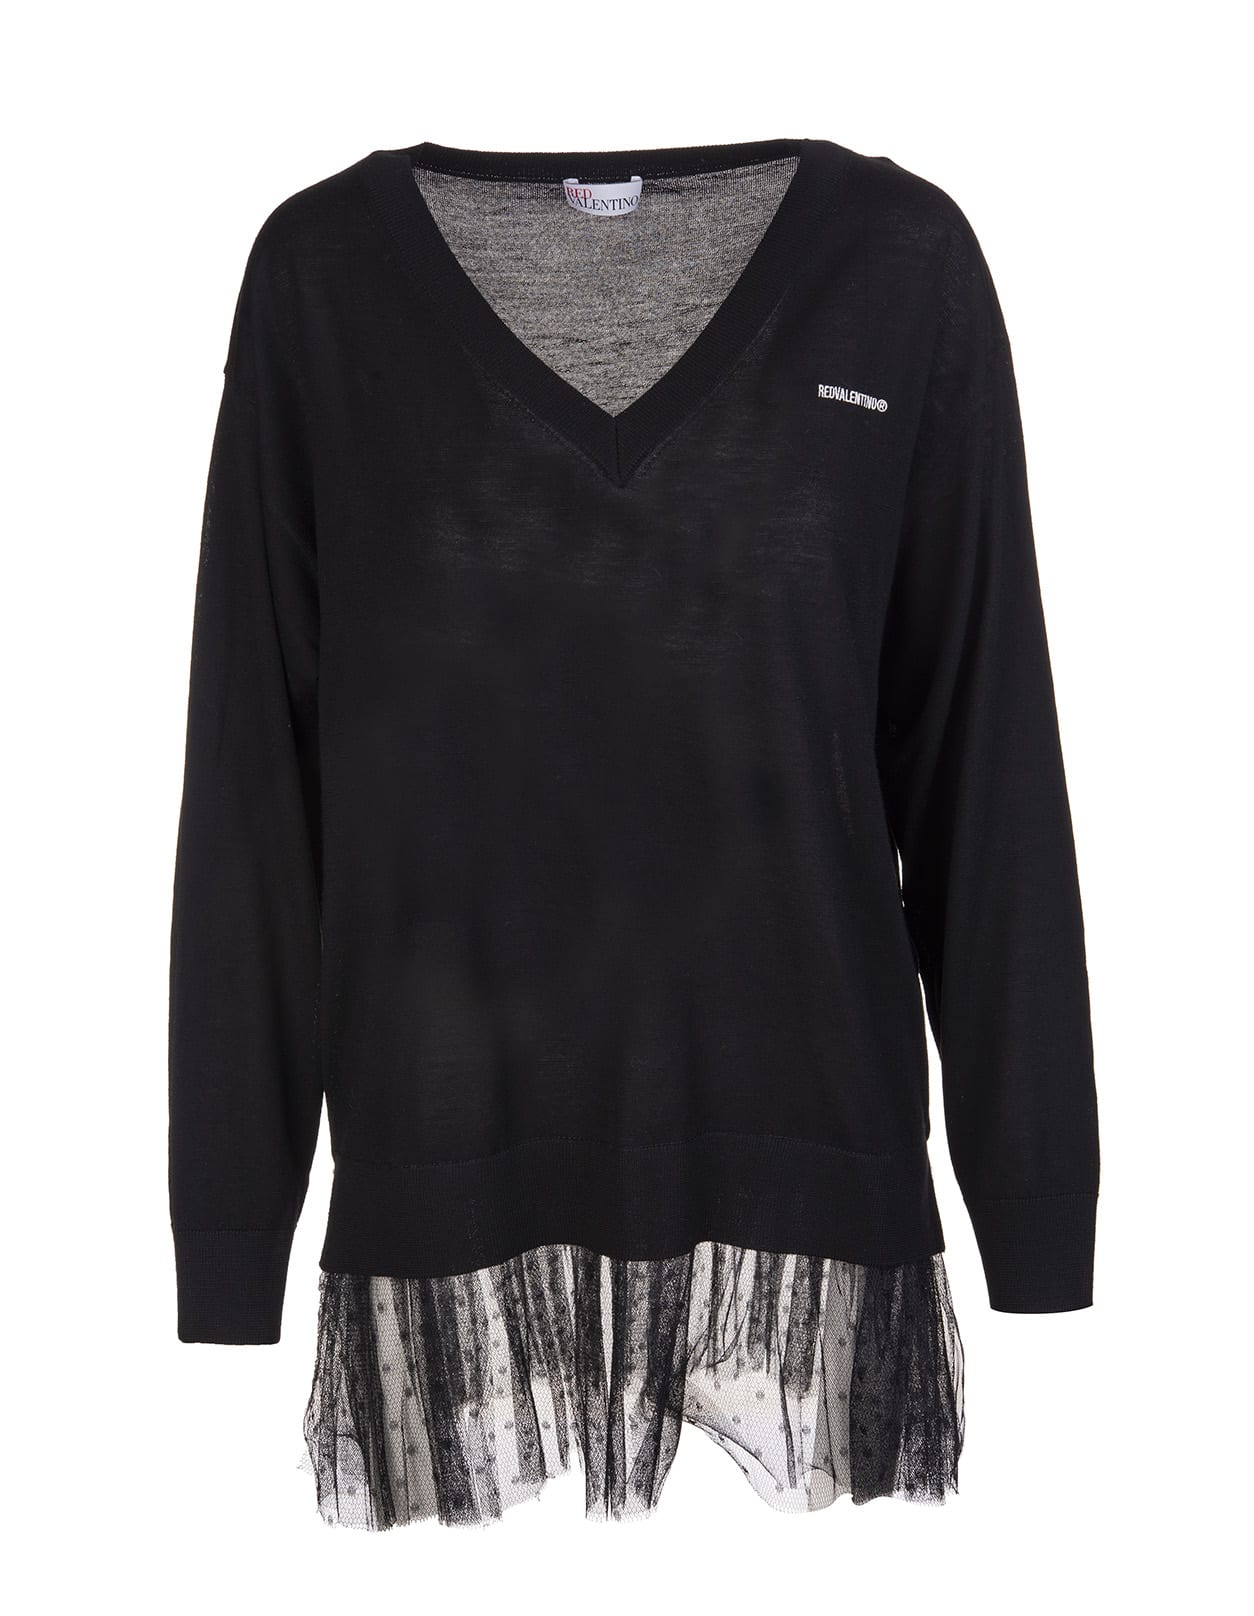 RED Valentino Black Wool V-neck Sweater With Point Desprit Tulle Insert